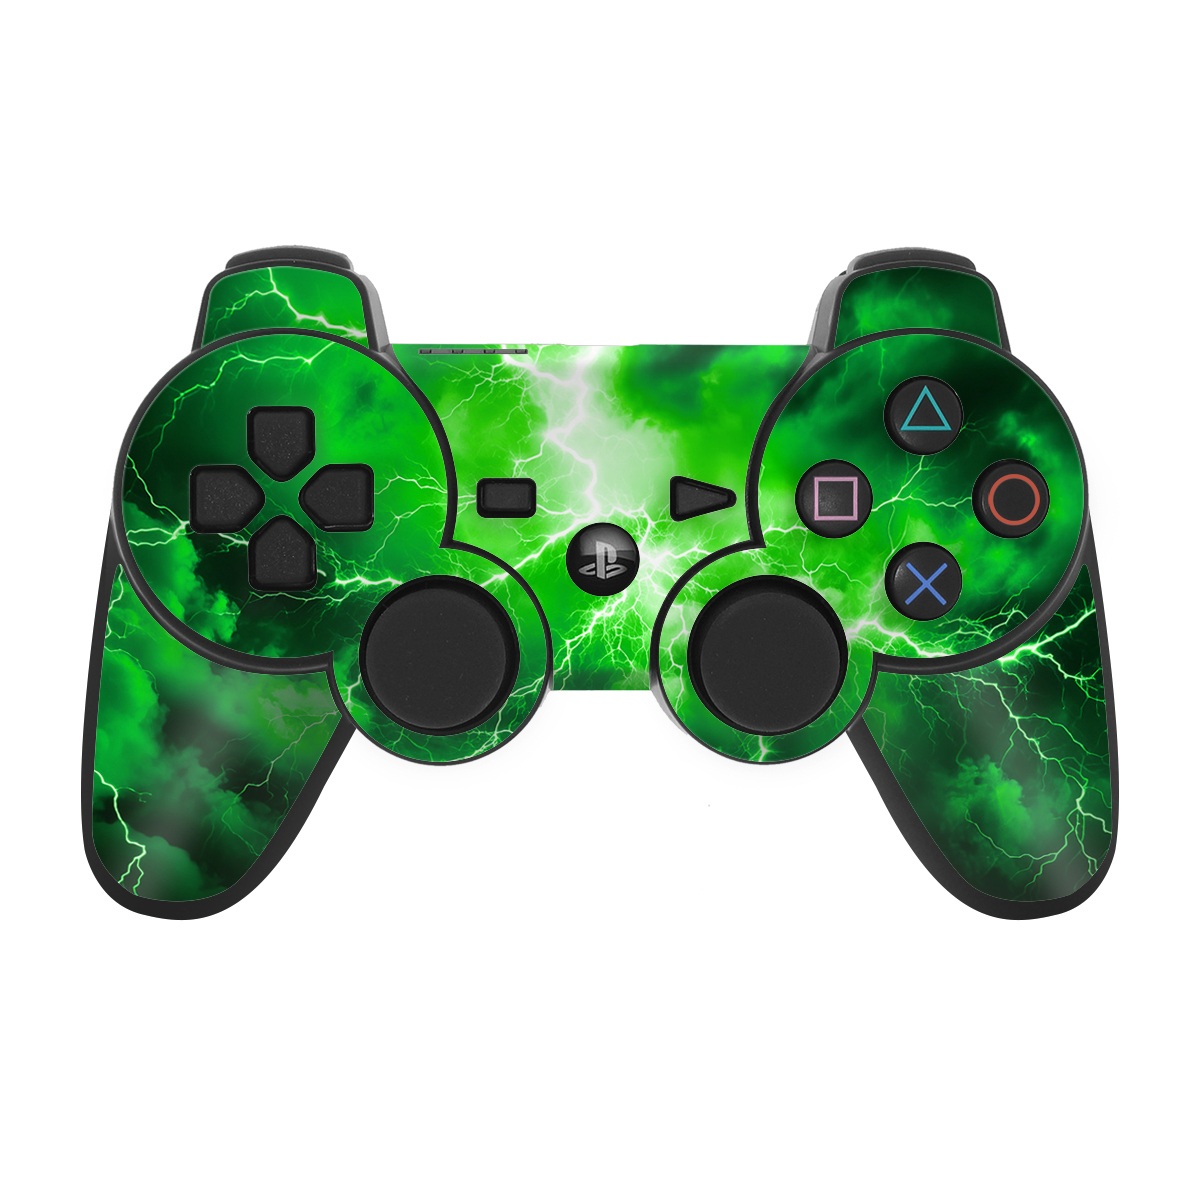 PS3 Controller Skin design of Water, Atmosphere, Thunder, Light, Green, Sky, Natural environment, Natural landscape, Electricity, Organism, with black, green colors